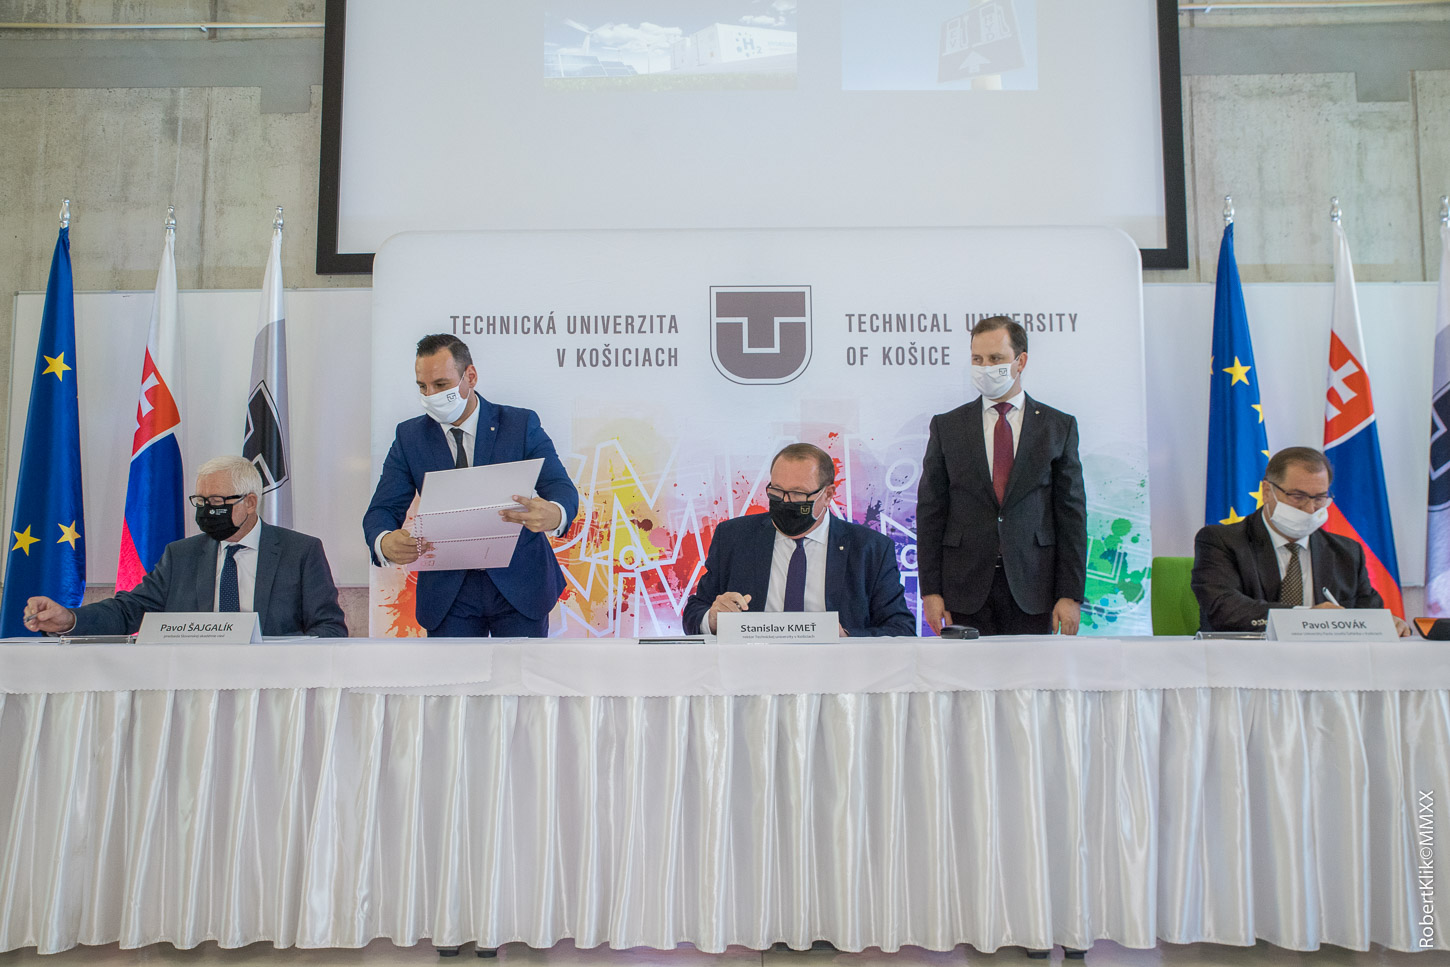 A Hydrogen Technology Research Centre will be established in Košice